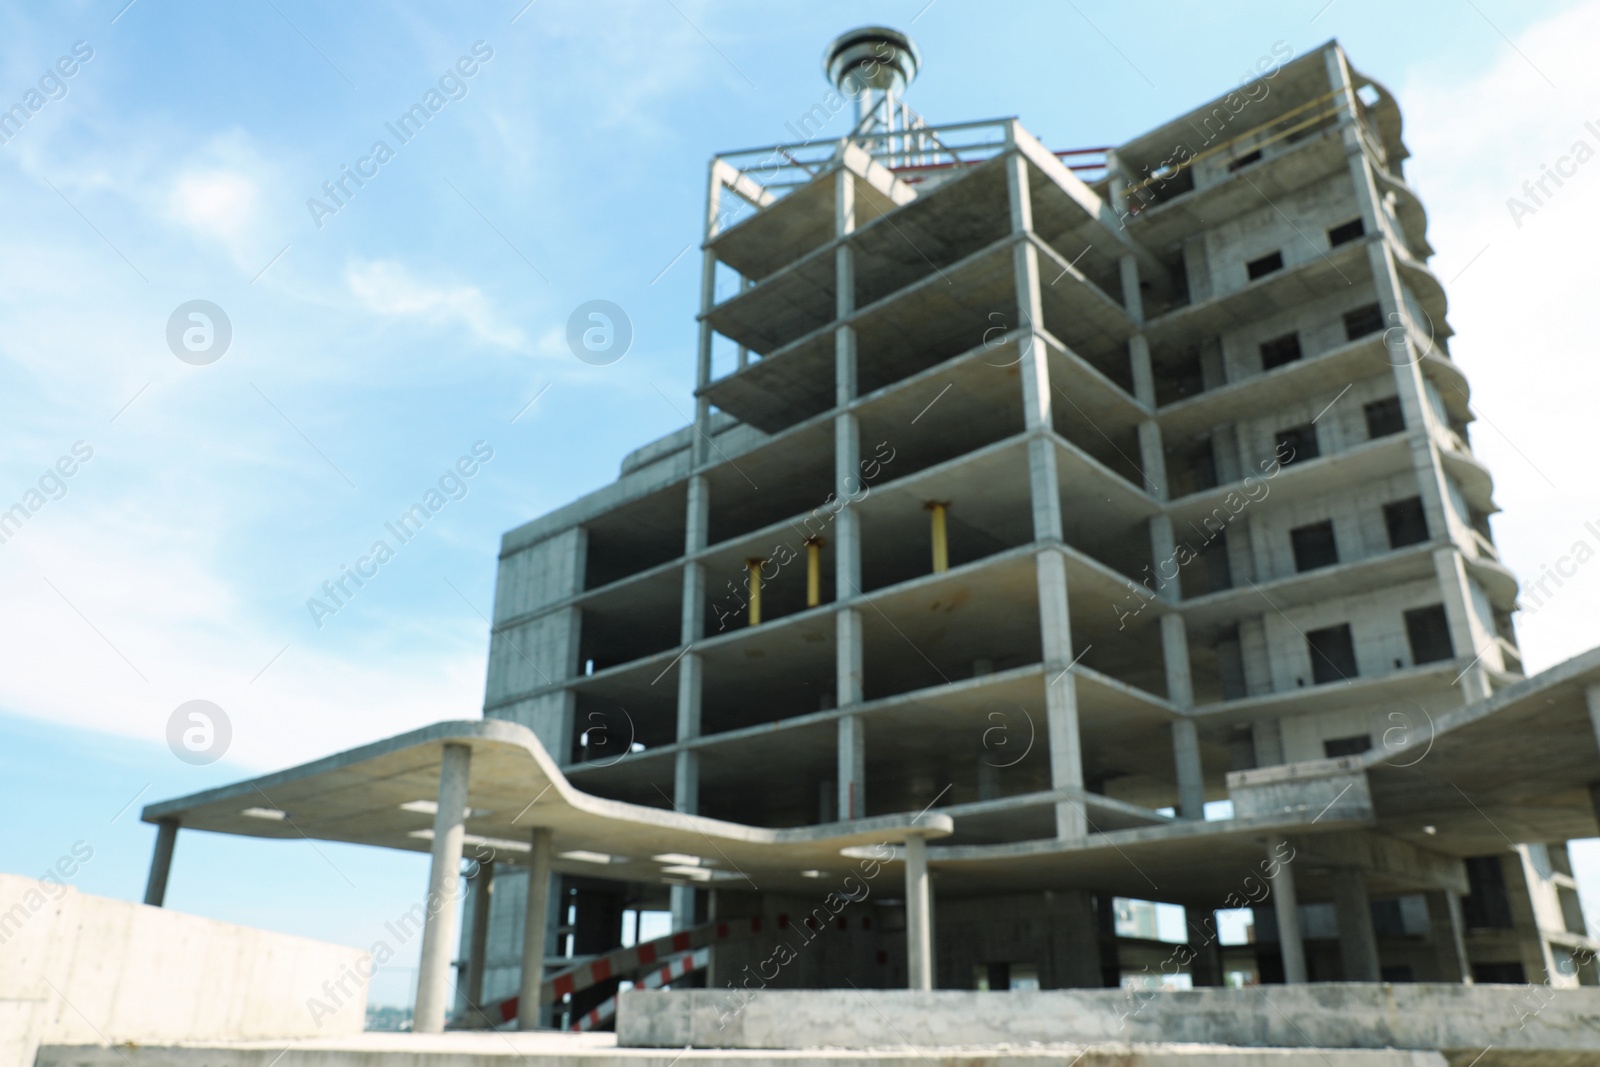 Photo of Blurred view of unfinished building outdoors. Construction safety rules